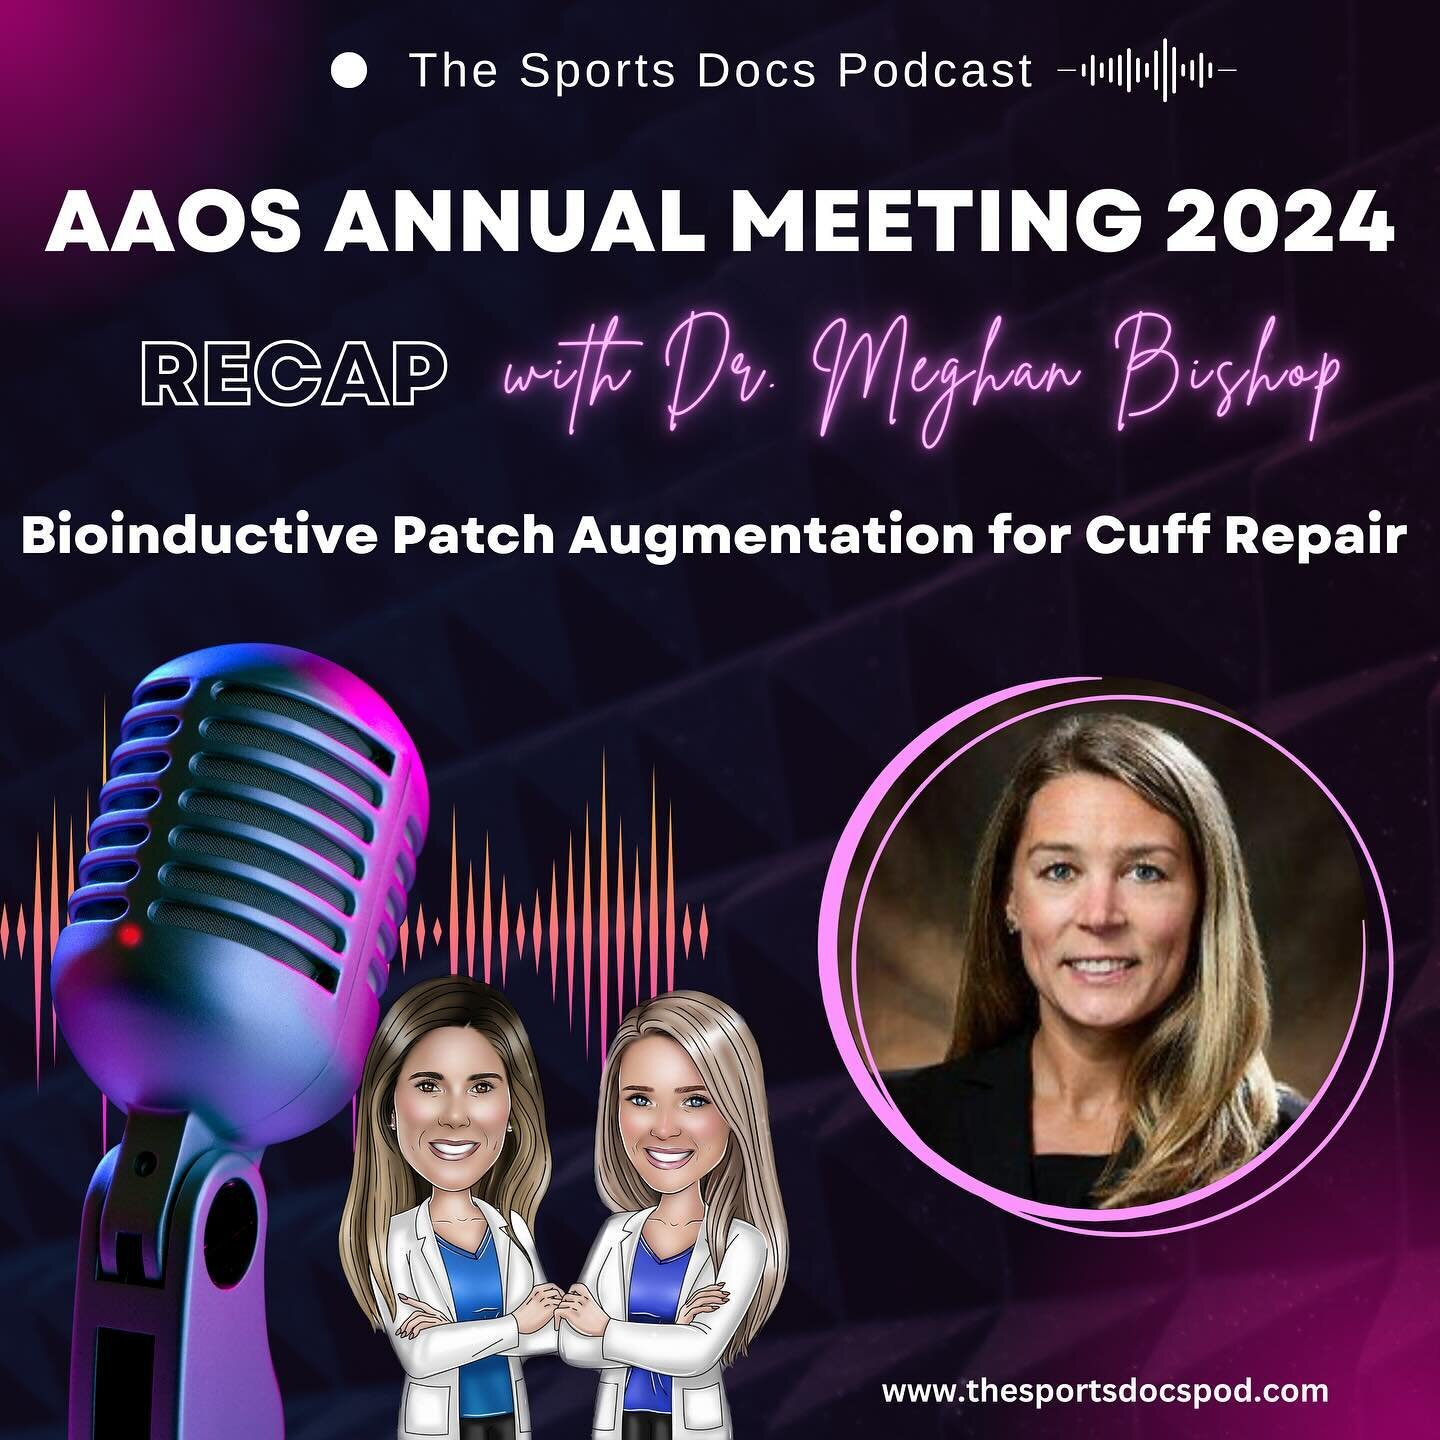 ✨ NEW episode is LIVE! ✨

We&rsquo;re continuing with our special series of episodes to recap the newest research presented at the American Academy of Orthopaedic Surgeons Annual Meeting held this month in San Francisco.

Were joined again by Dr. Meg